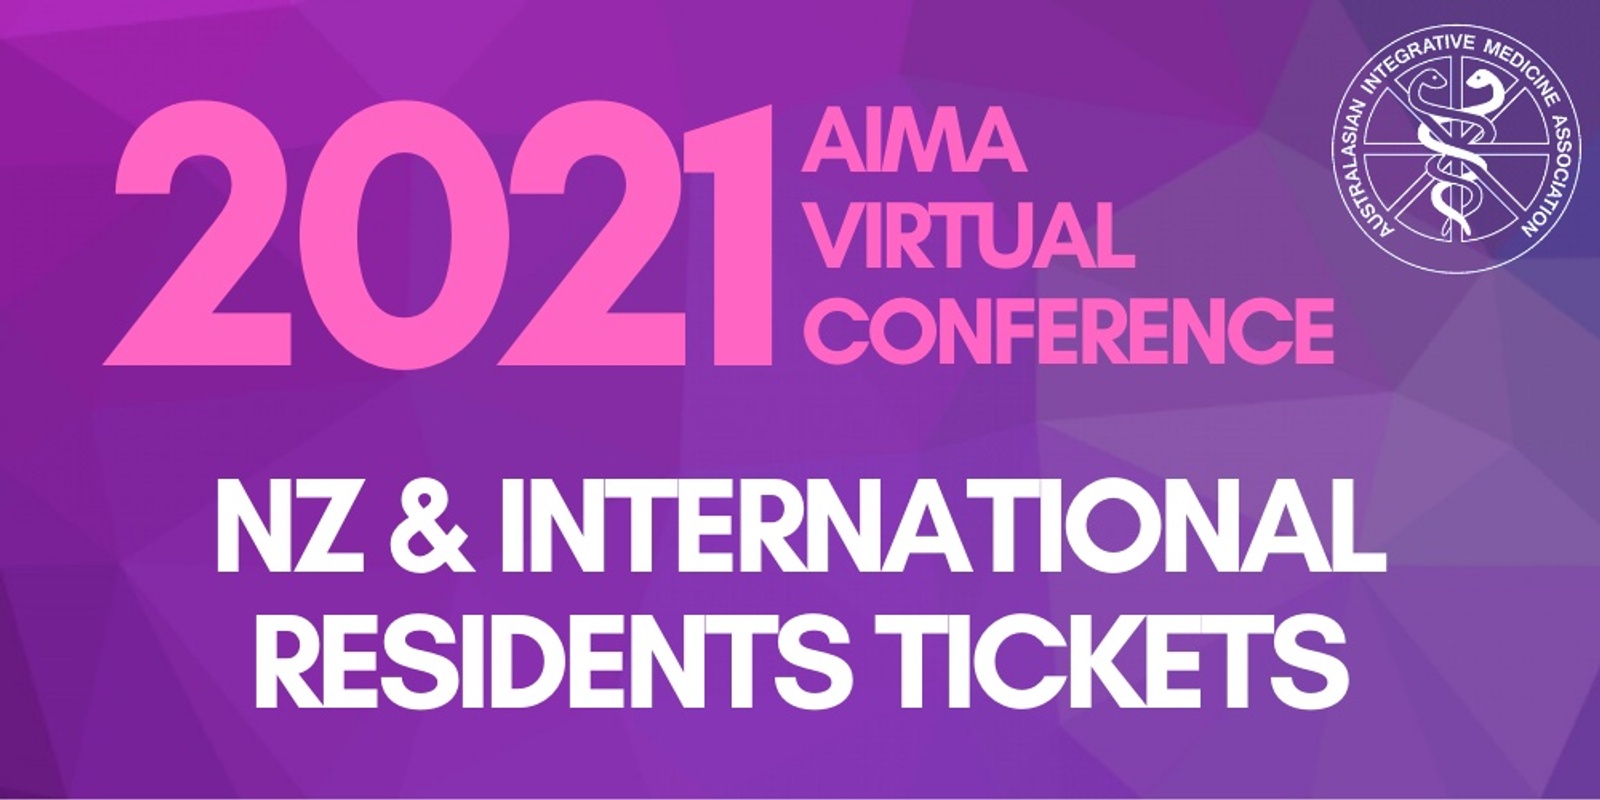 Banner image for 2021 AIMA Virtual Conference - NZ & International Attendees